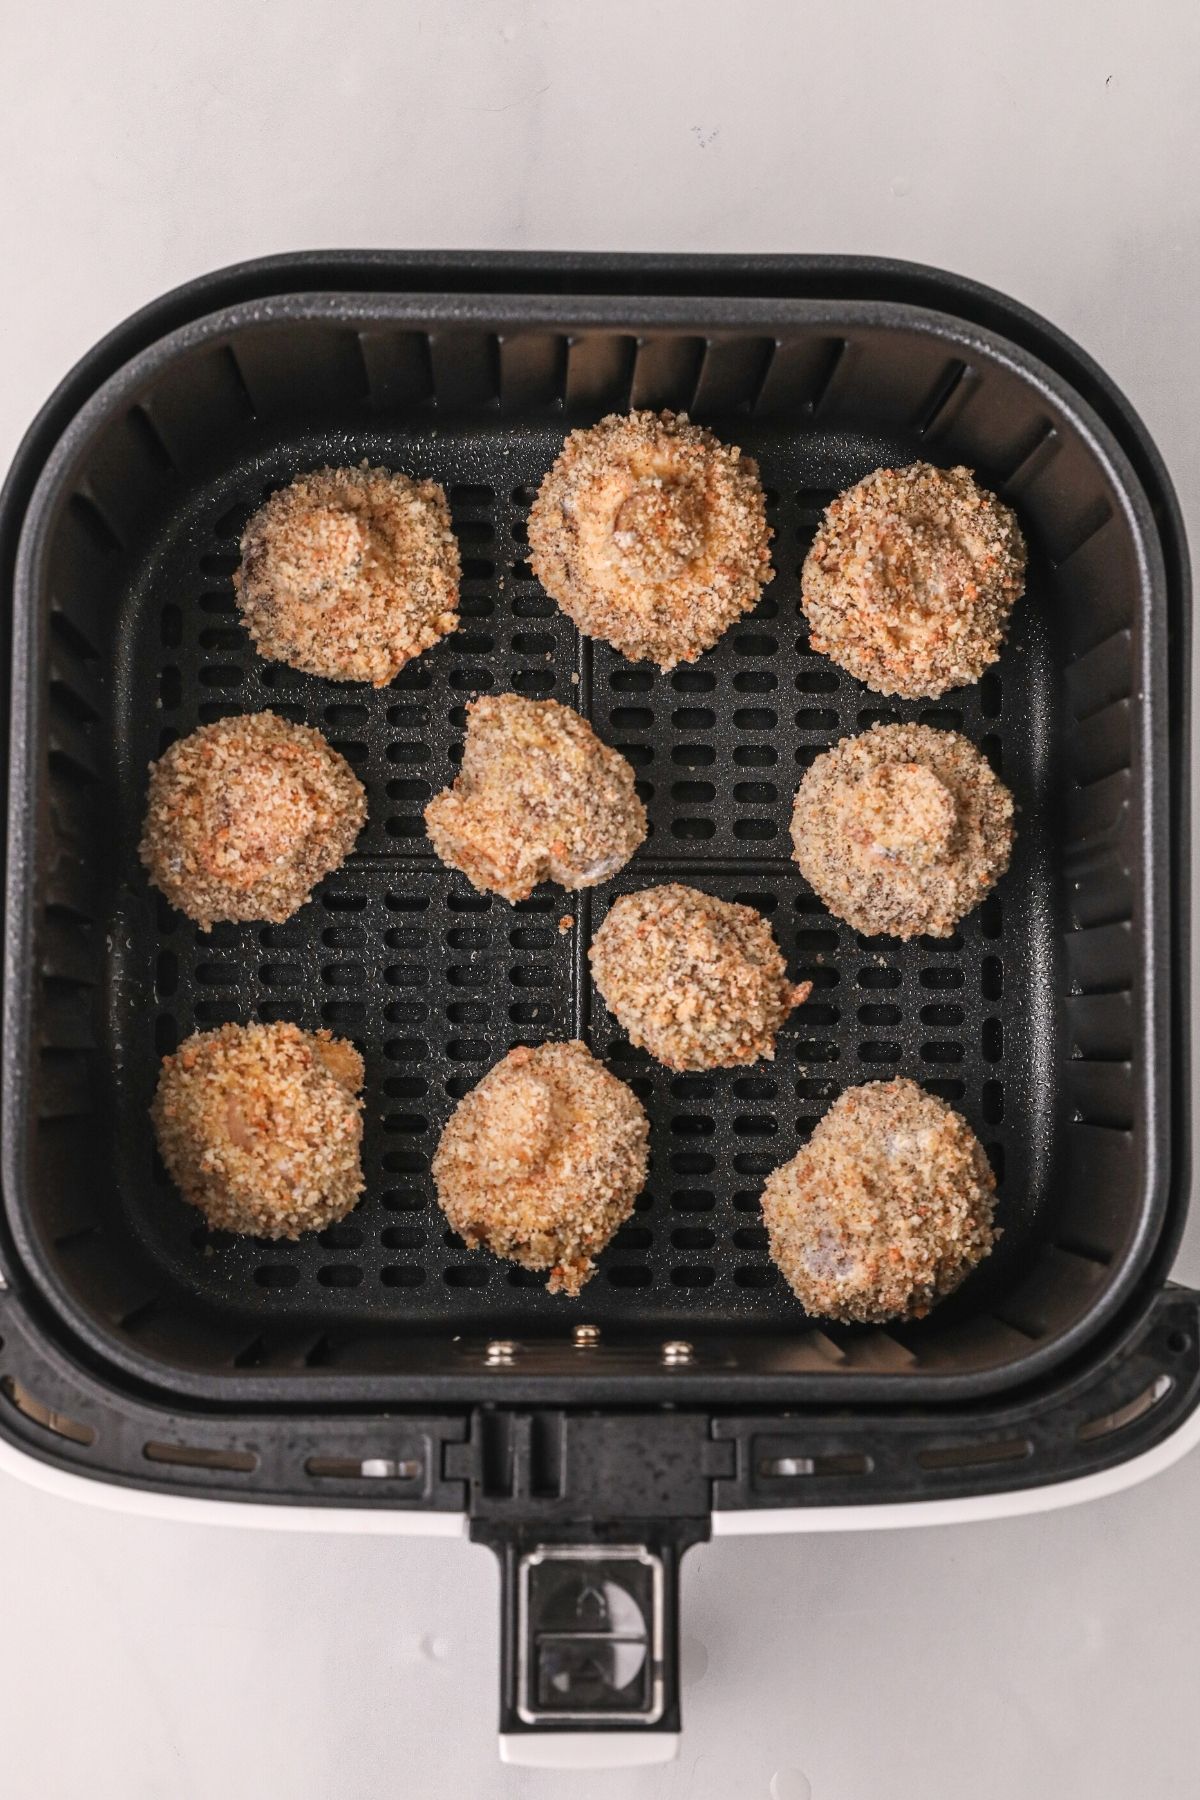 Battered mushrooms in the air fryer basket before being cooked